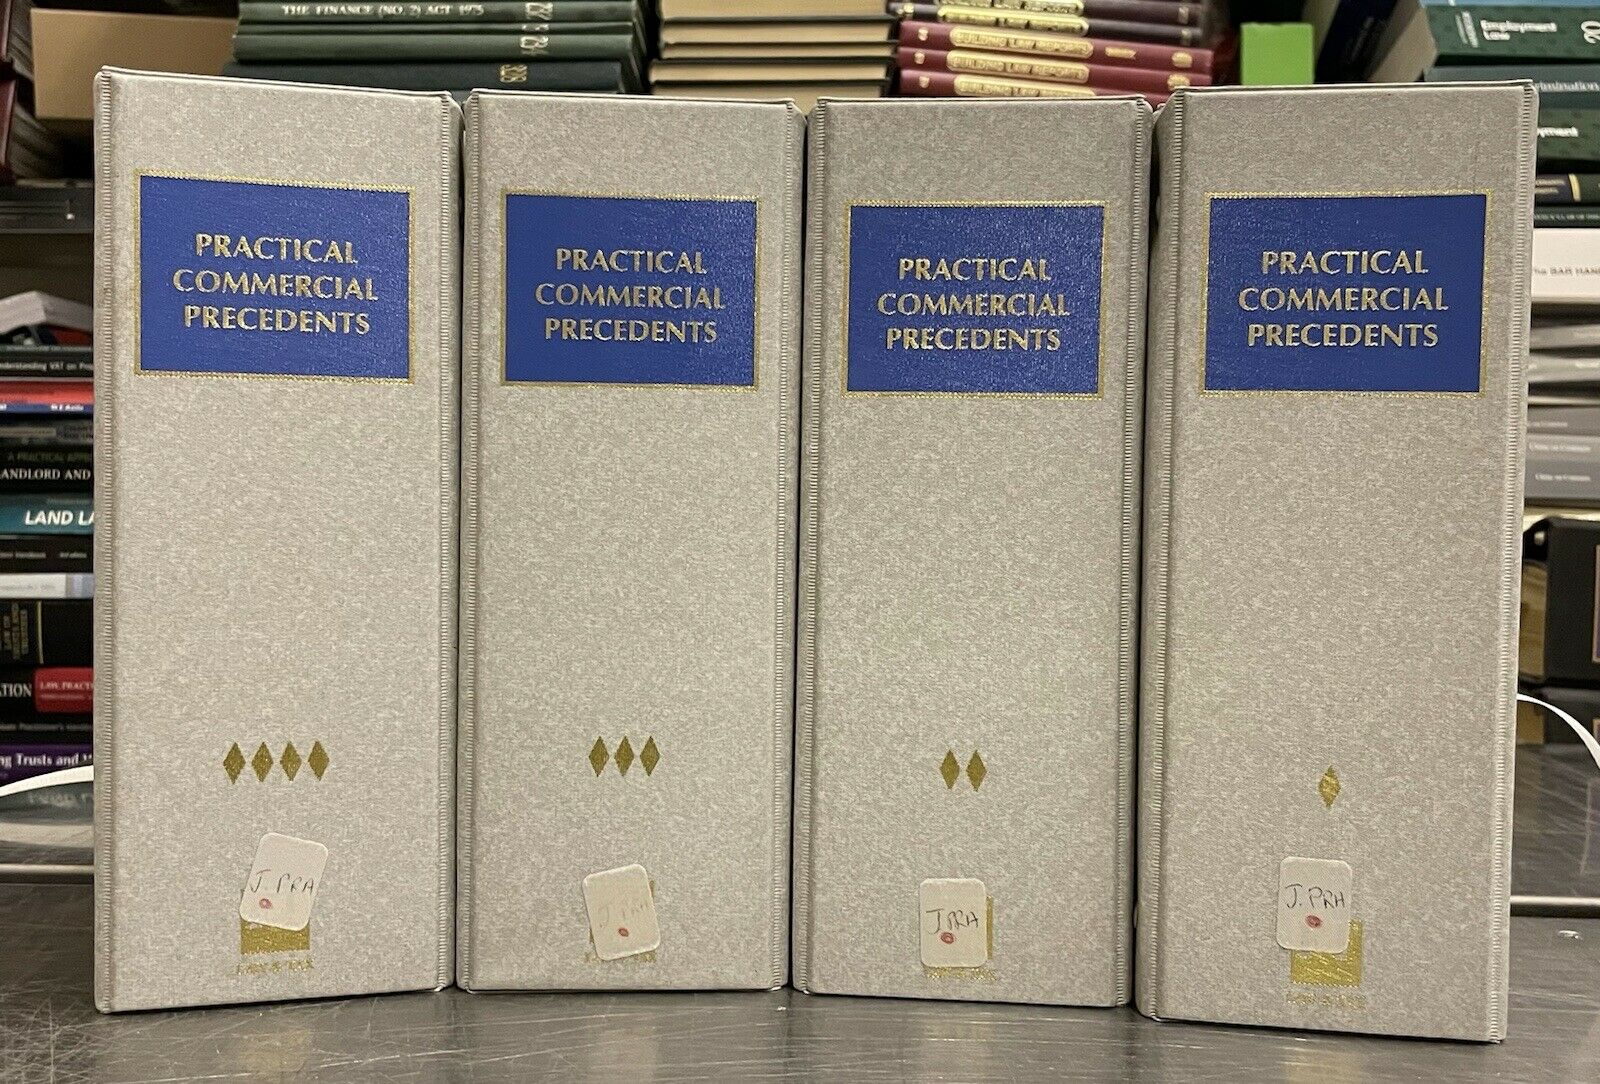 Practical Commercial Precedents Vols 1 4 Up To 13 Law Books Law Book Sellers